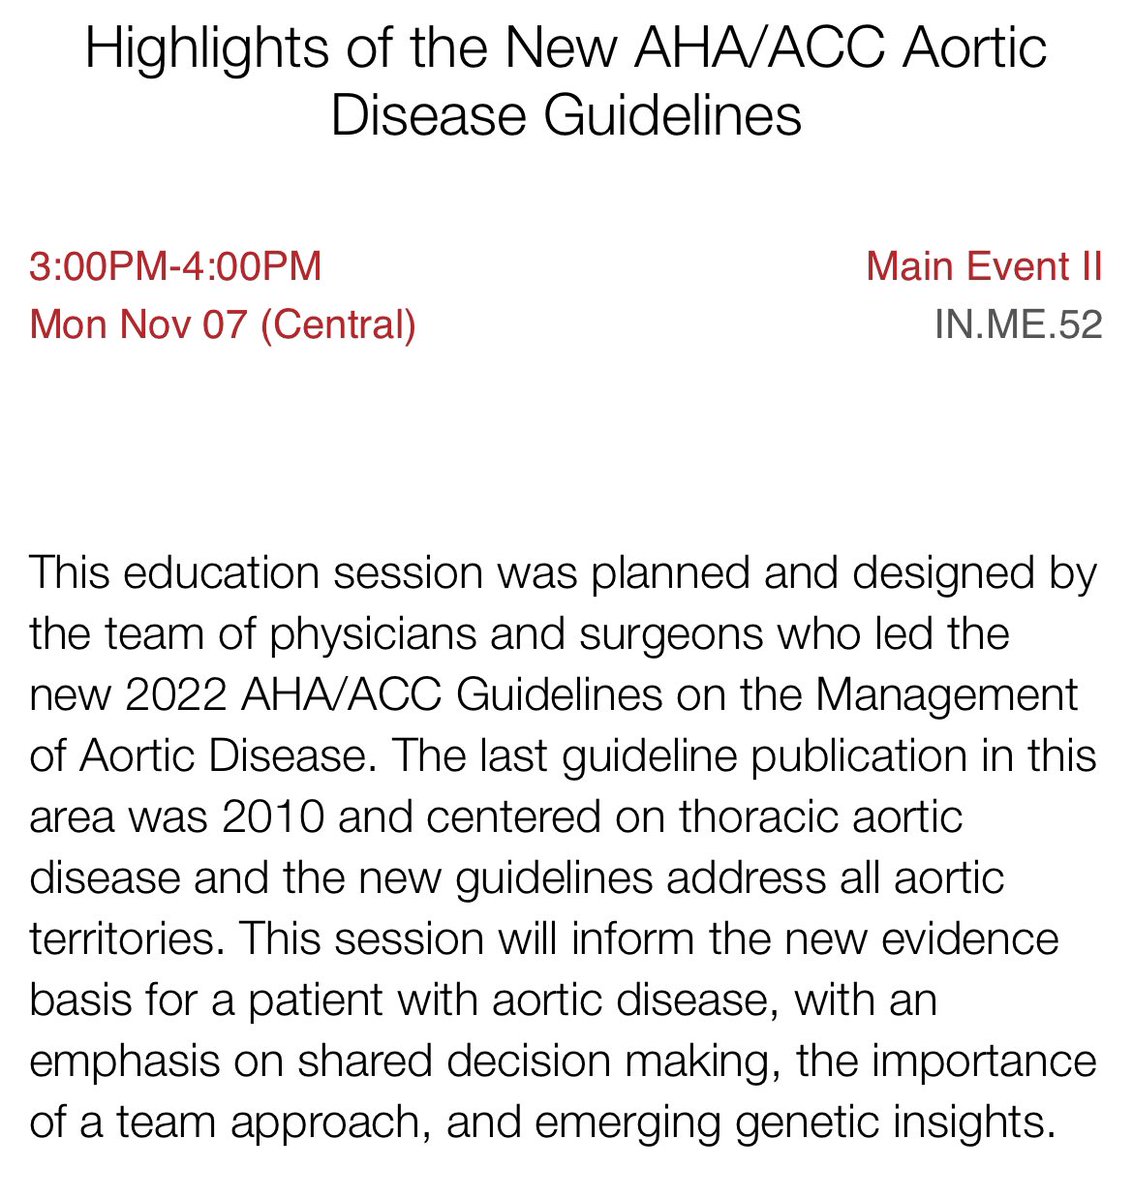 Join members of the 2022 ACC/AHA Guideline on Aortic Disease as we present highlights of the new recommendations this afternoon at the AHA in Chicago. #AorticDisease #aorticdissection #aorta #clinicalguidelines